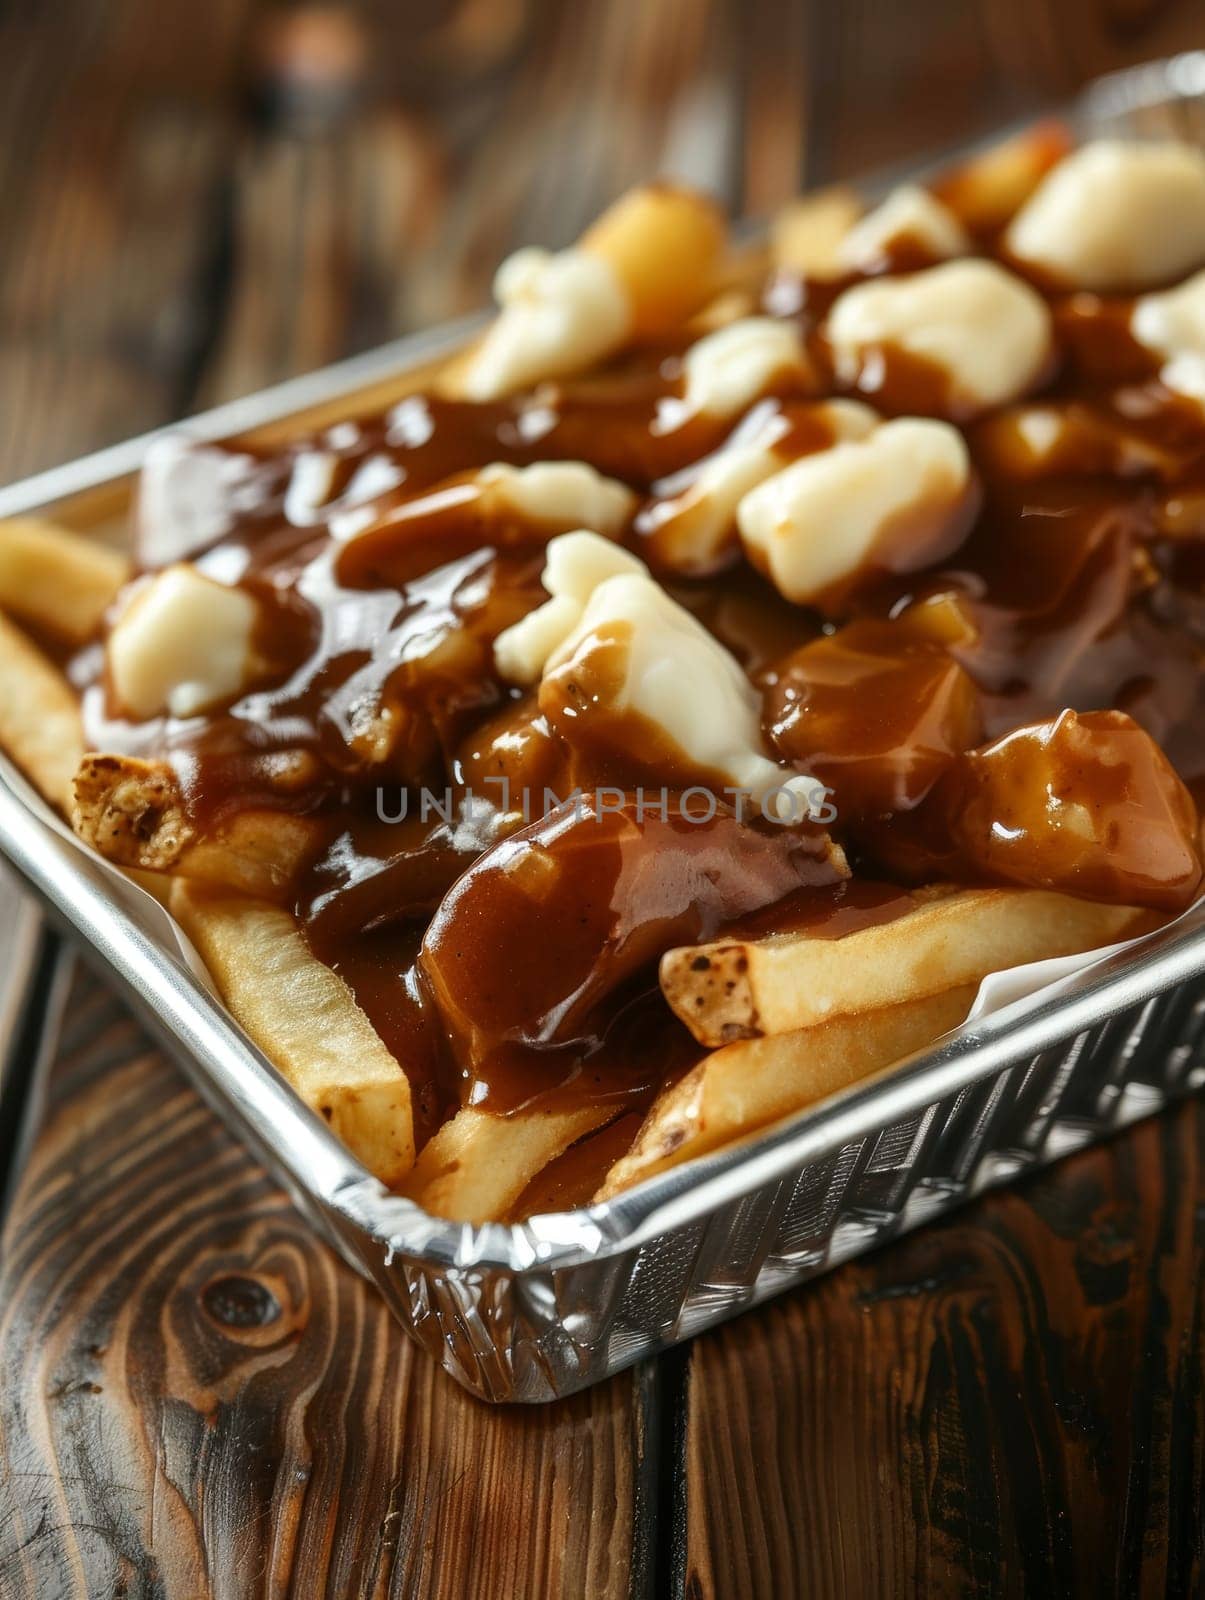 Canadian poutine in a tray, with fries, cheese curds, and brown gravy. A classic and comforting dish from Canada. by sfinks